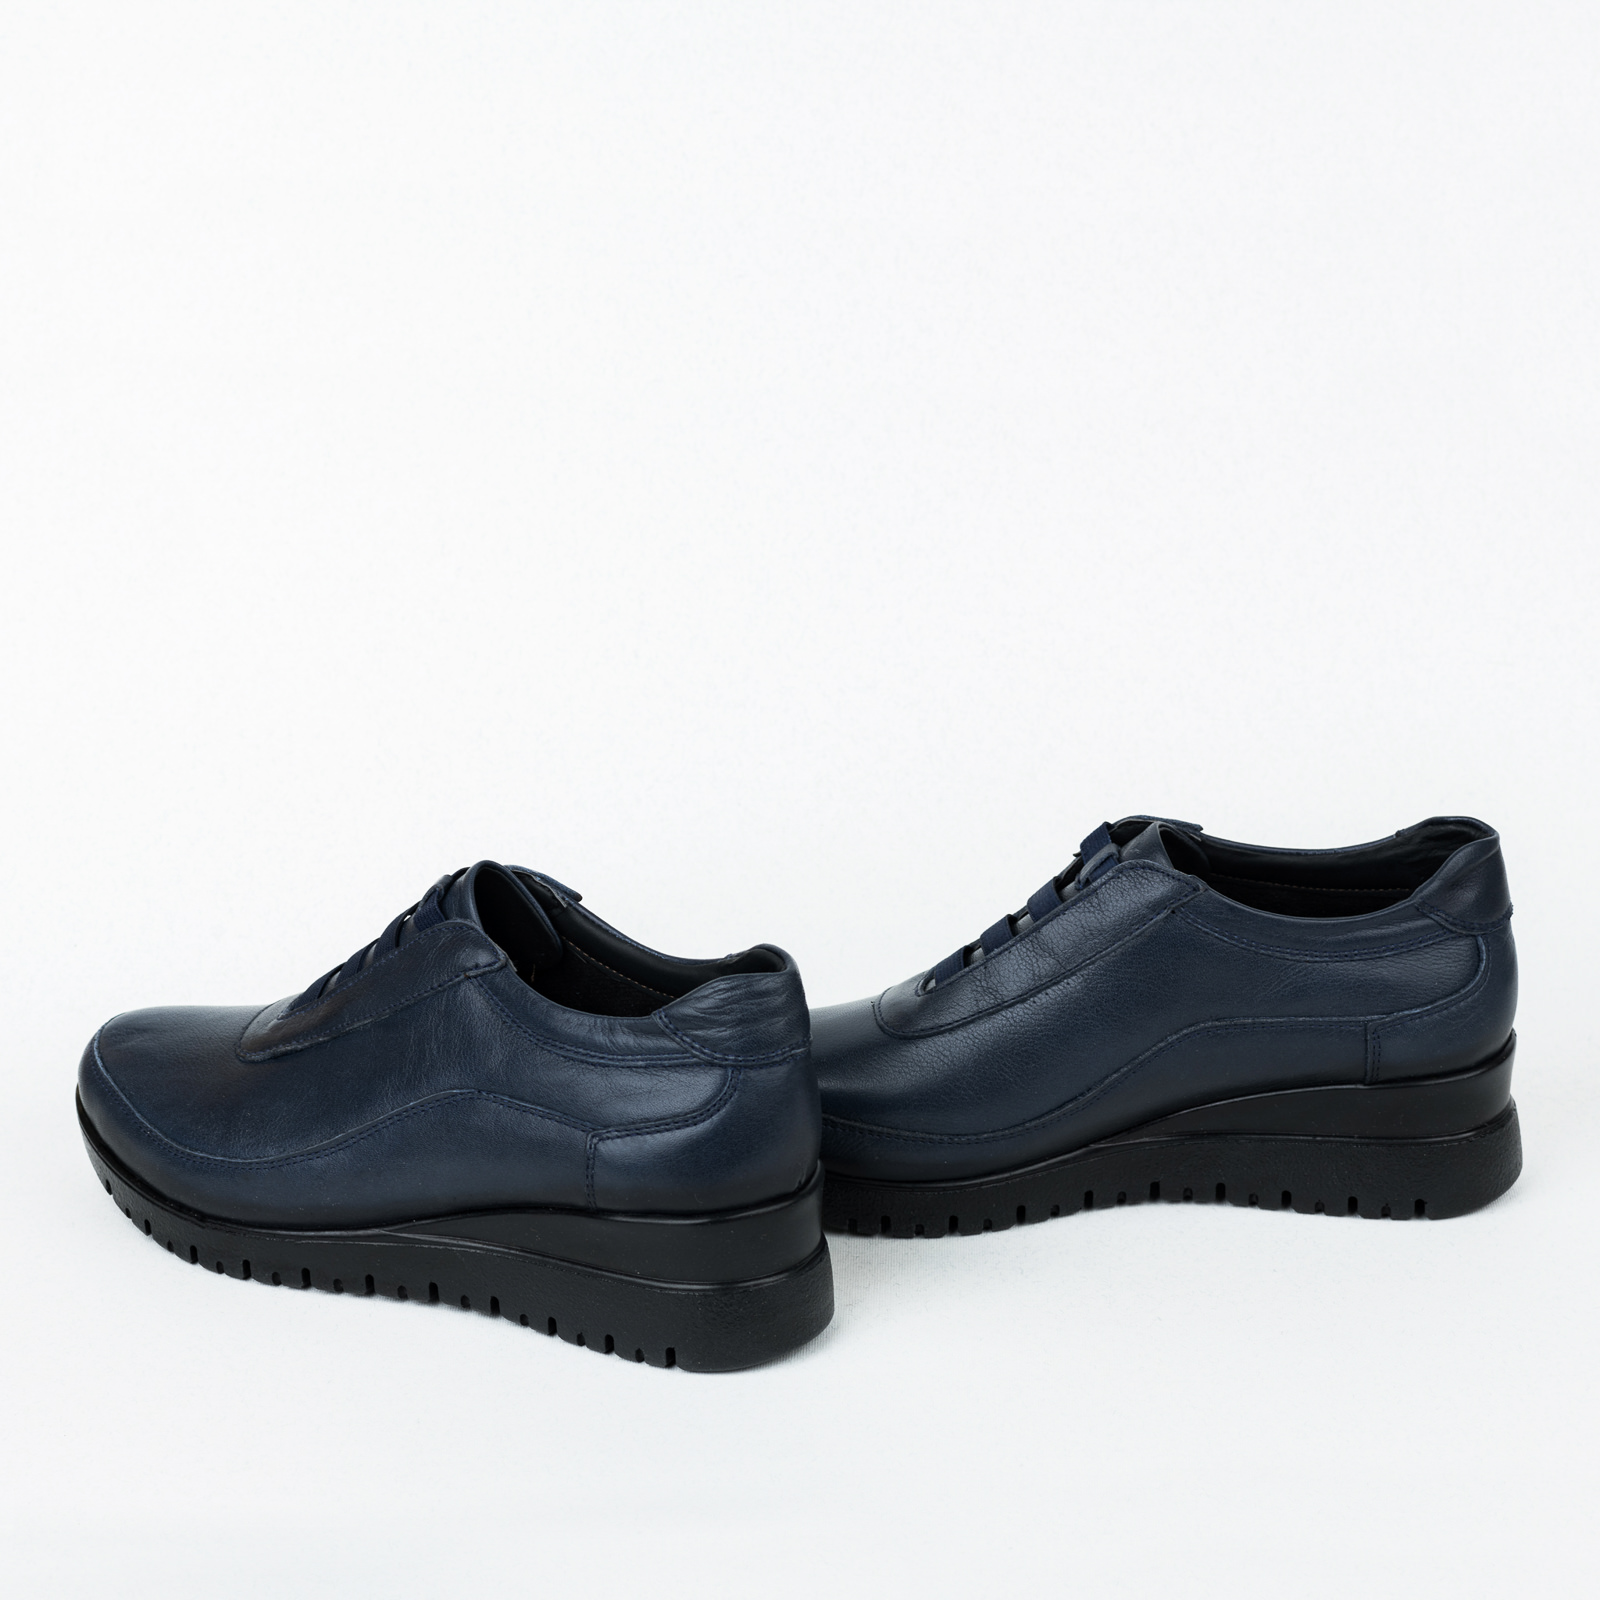 Leather shoes & flats B471 - NAVY